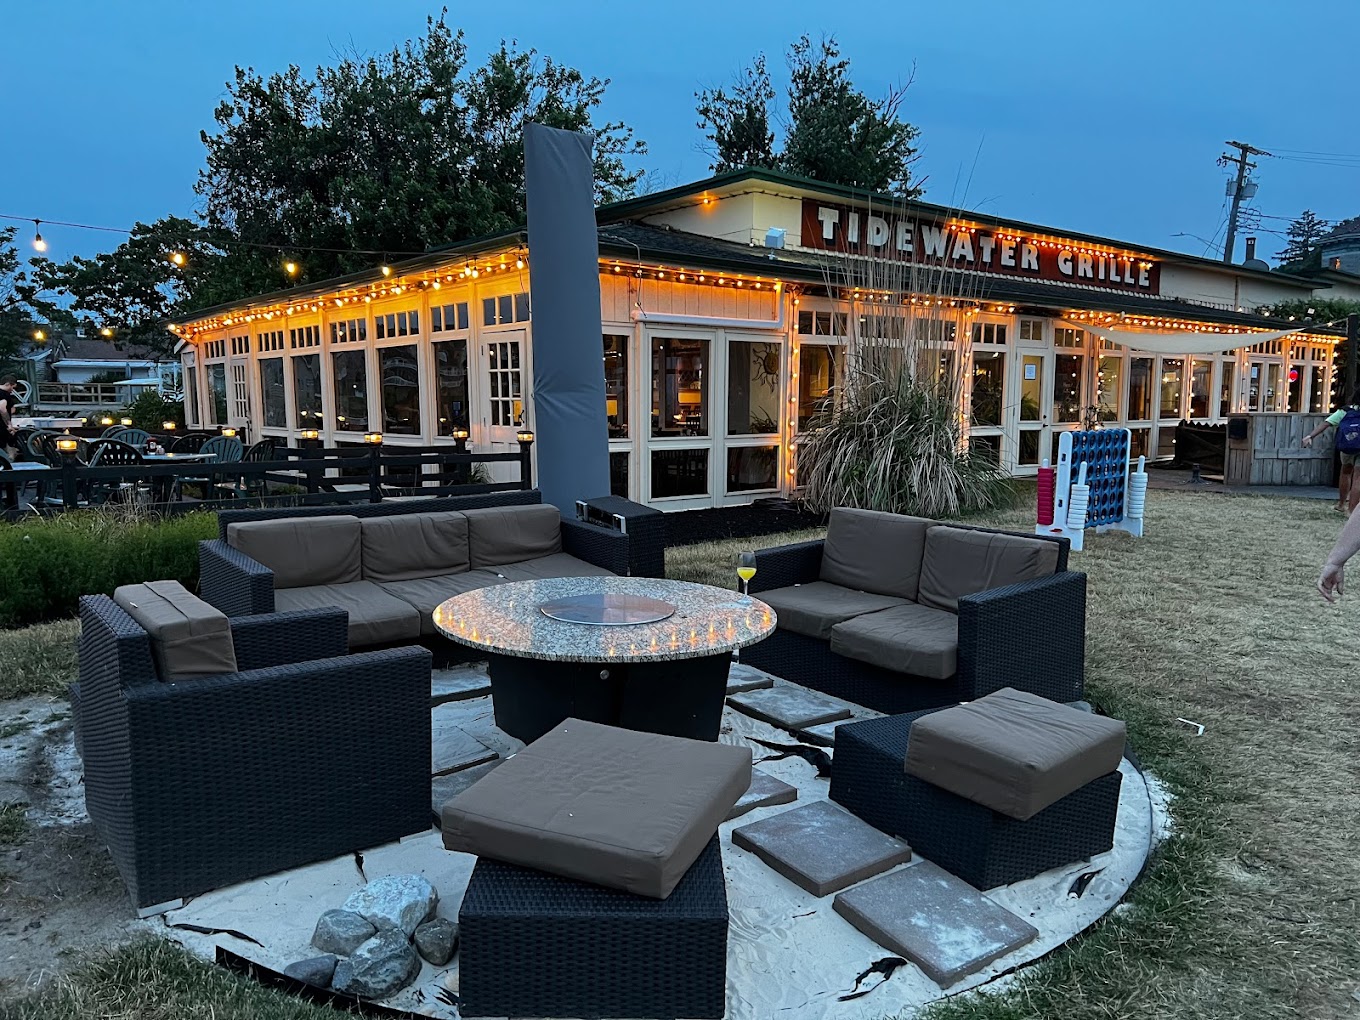 Exterior and fire pits of Tidewater Grille